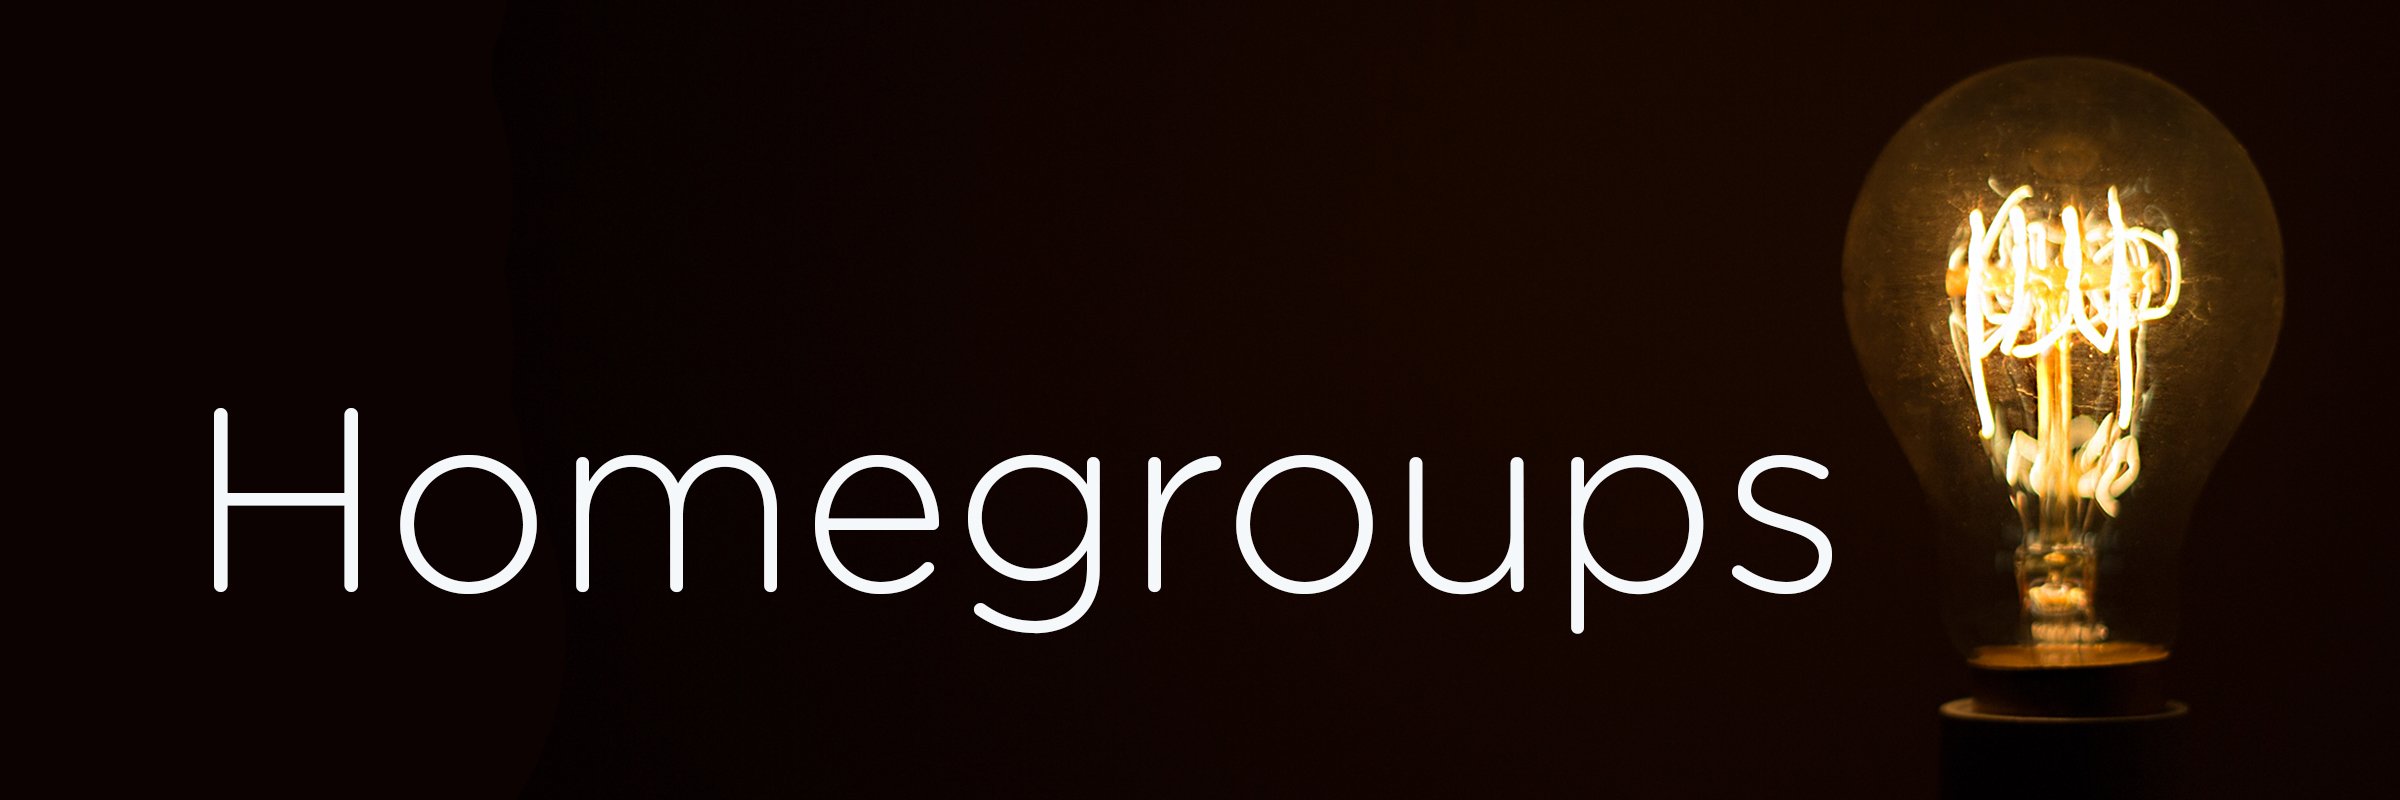 home group definition